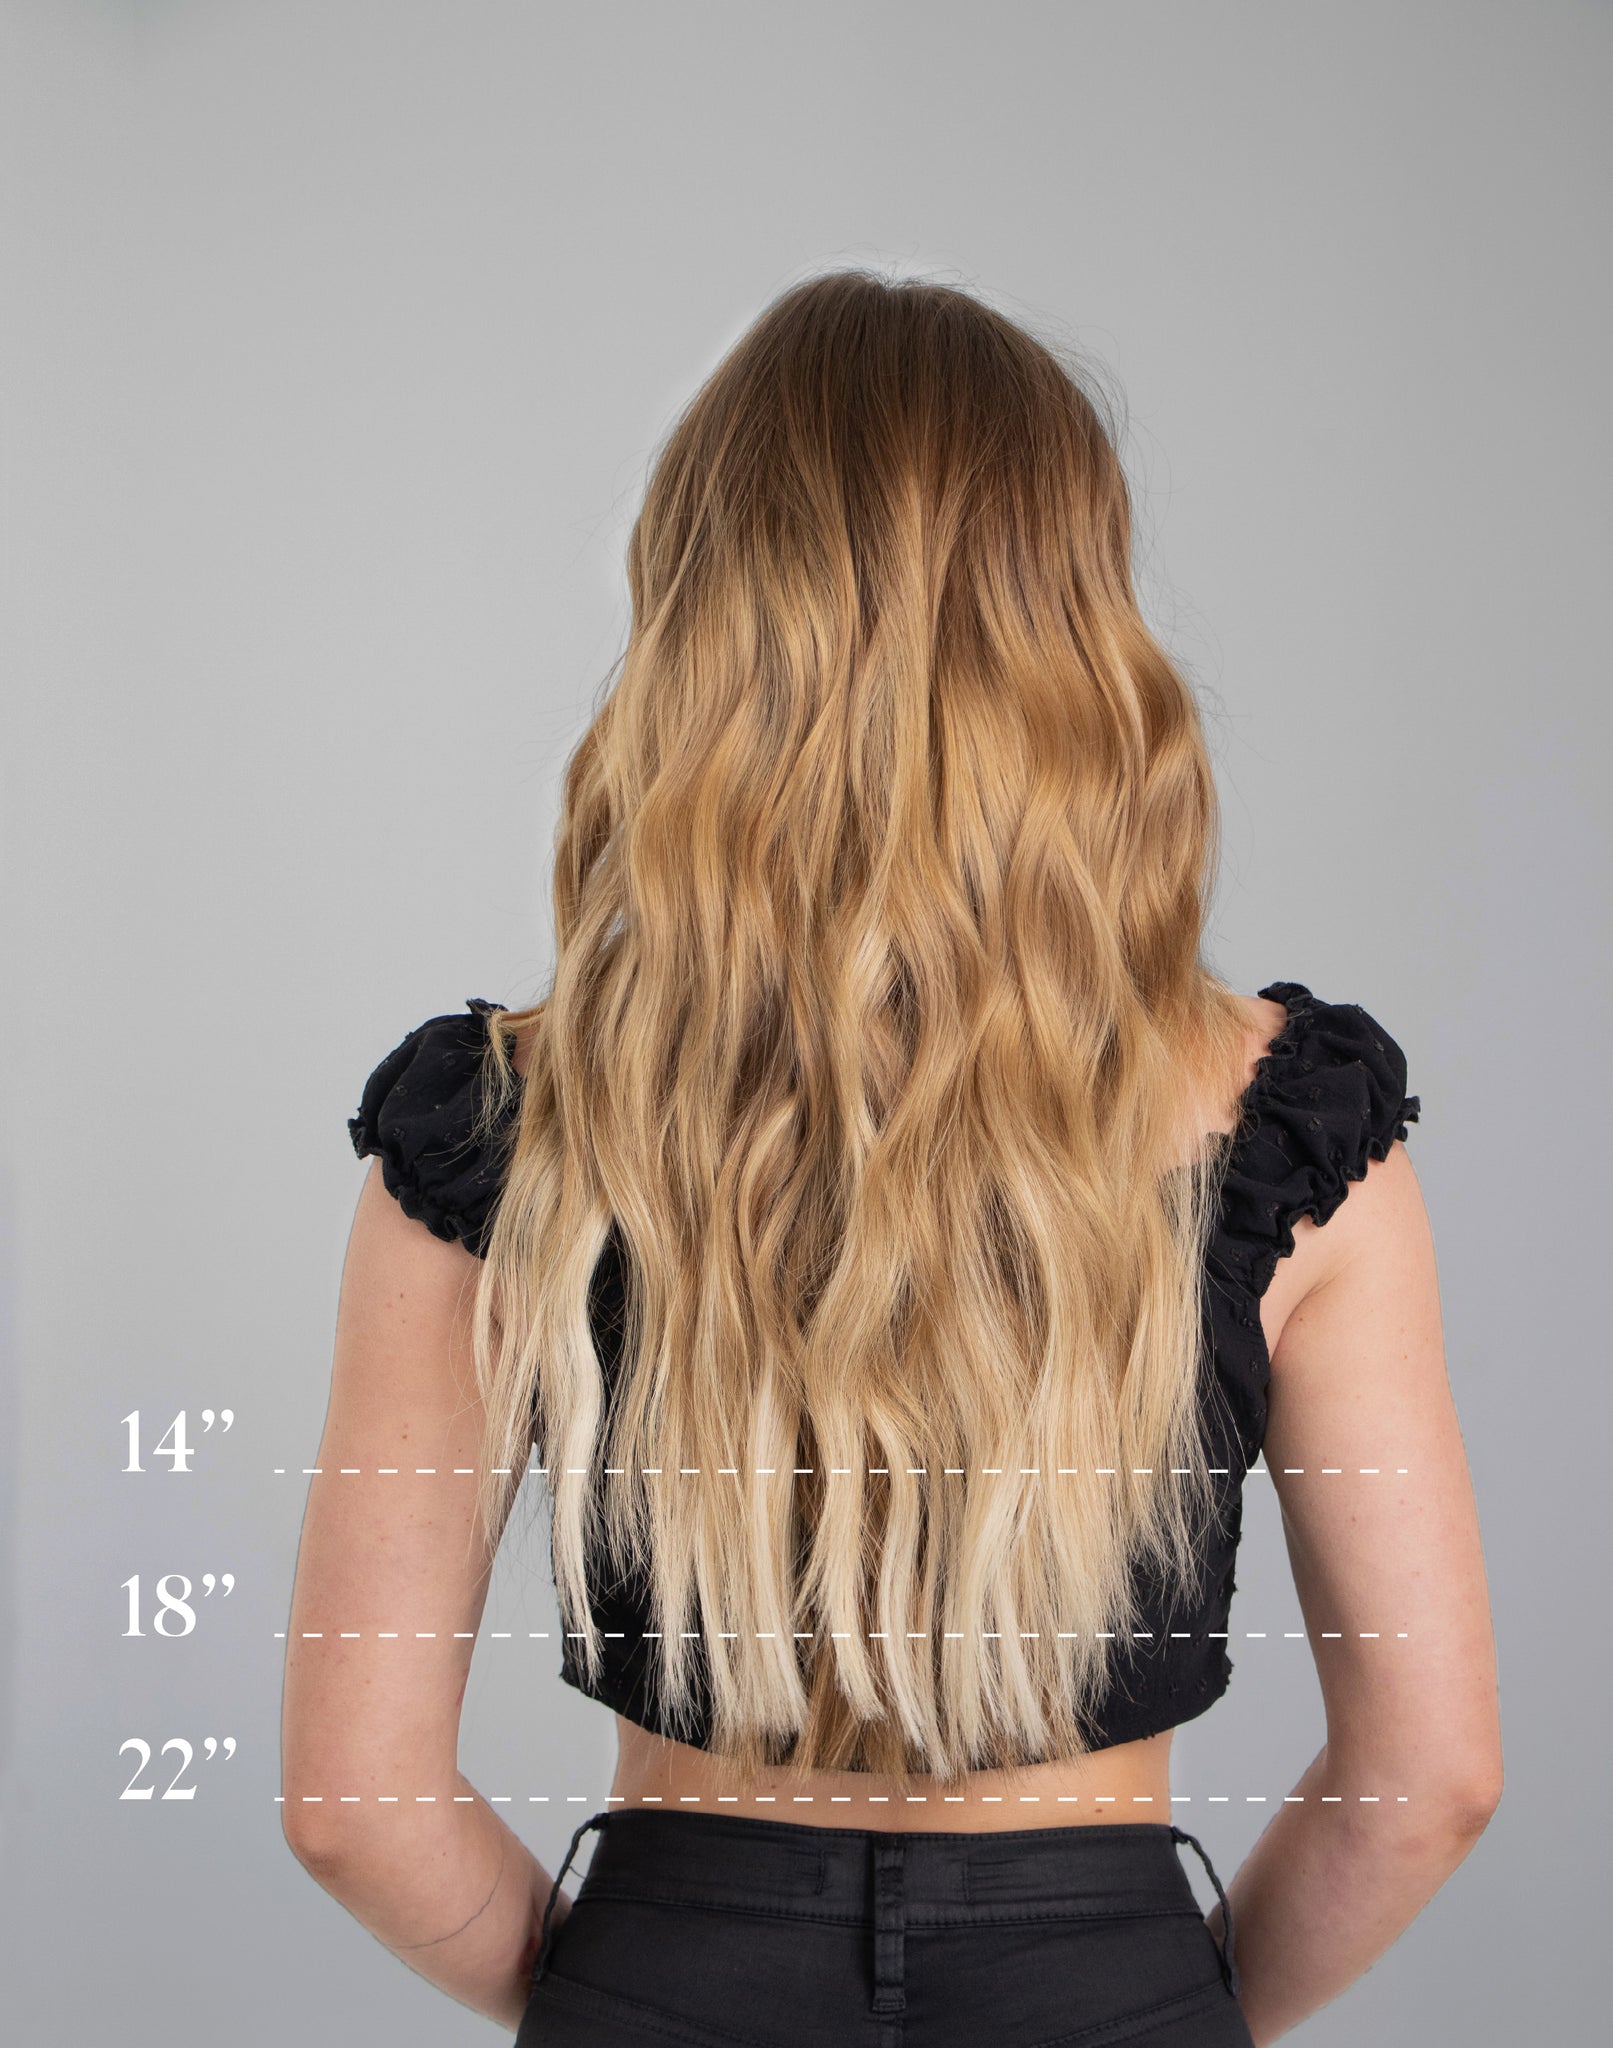 chart showing different lengths of wavy hair on model. 14" hair length falls below armpits, 18" mid-back, 22" hips